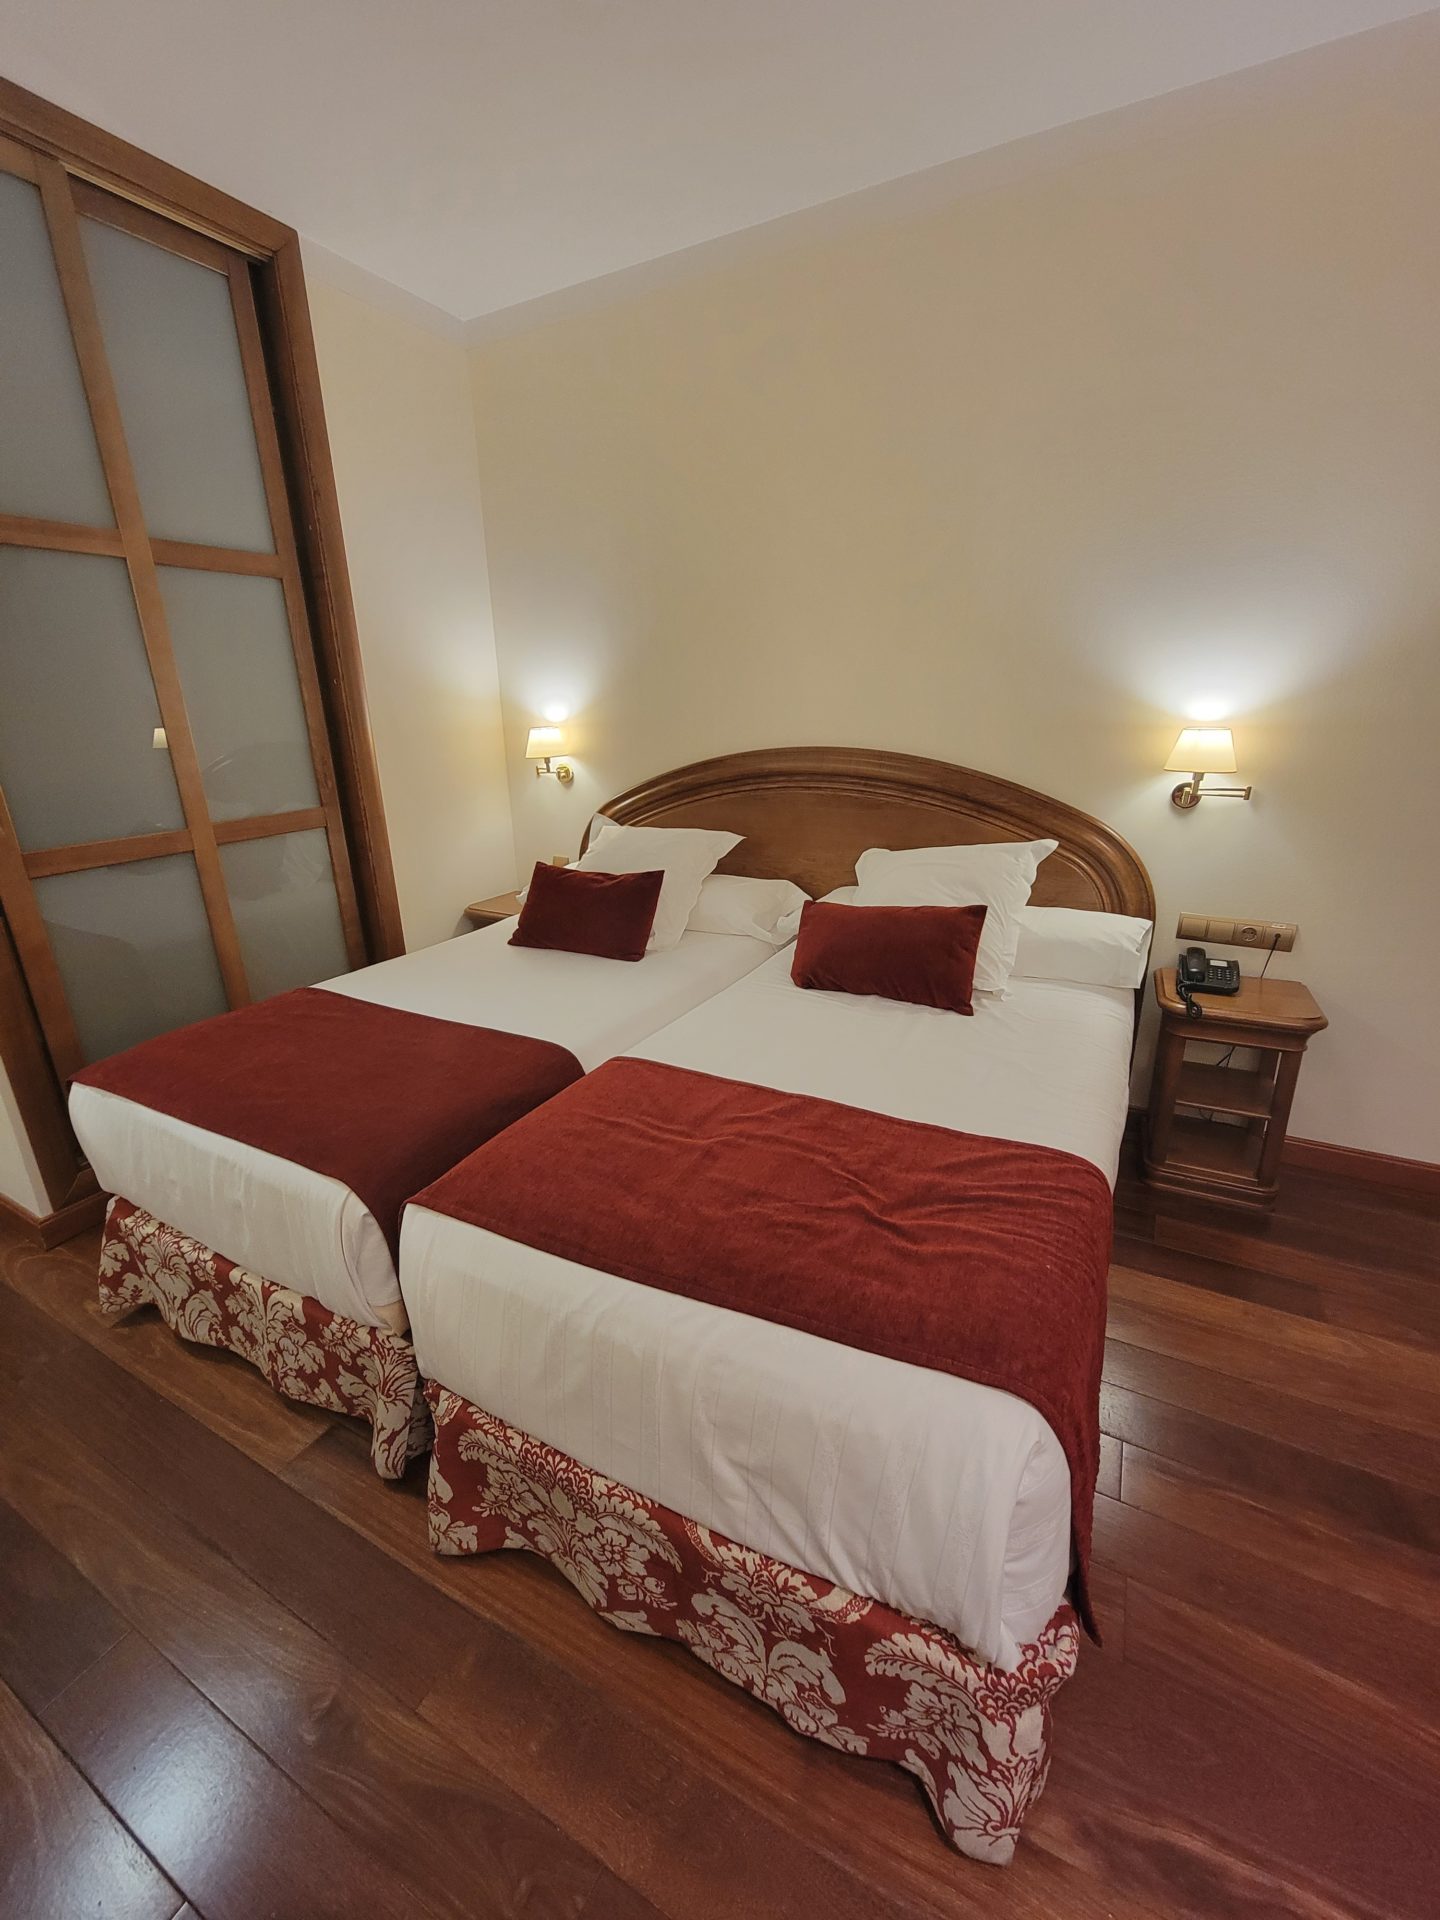 a two beds with red and white pillows